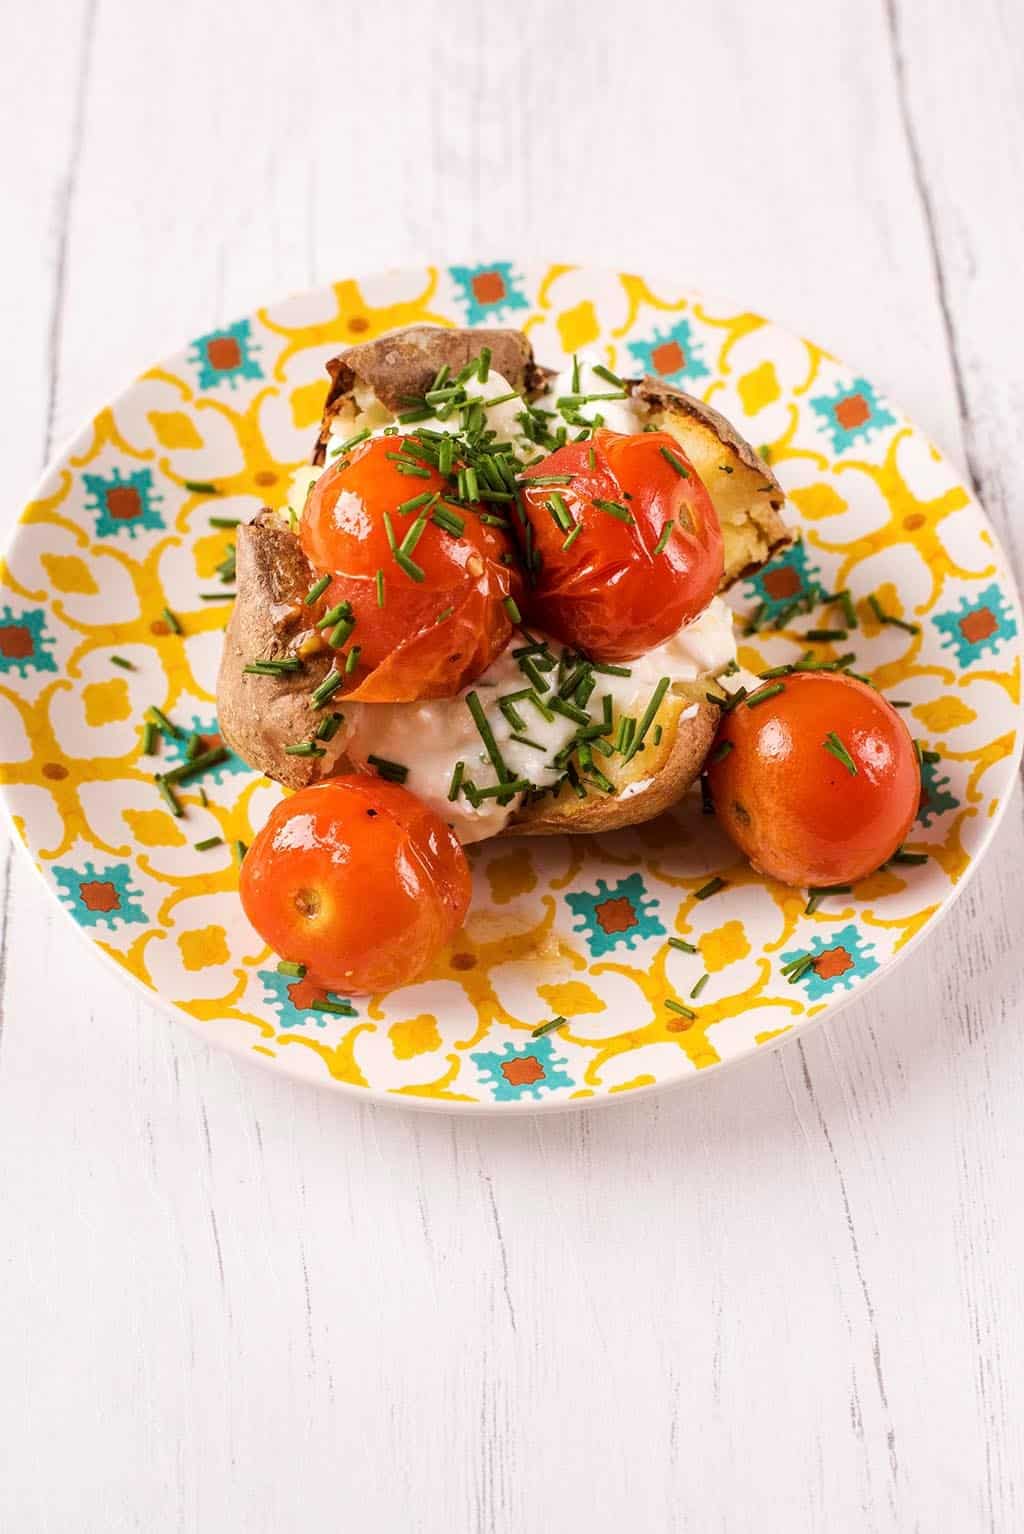 Baked Potato topped with Cottage Cheese and Roasted Cherry Tomatoes.